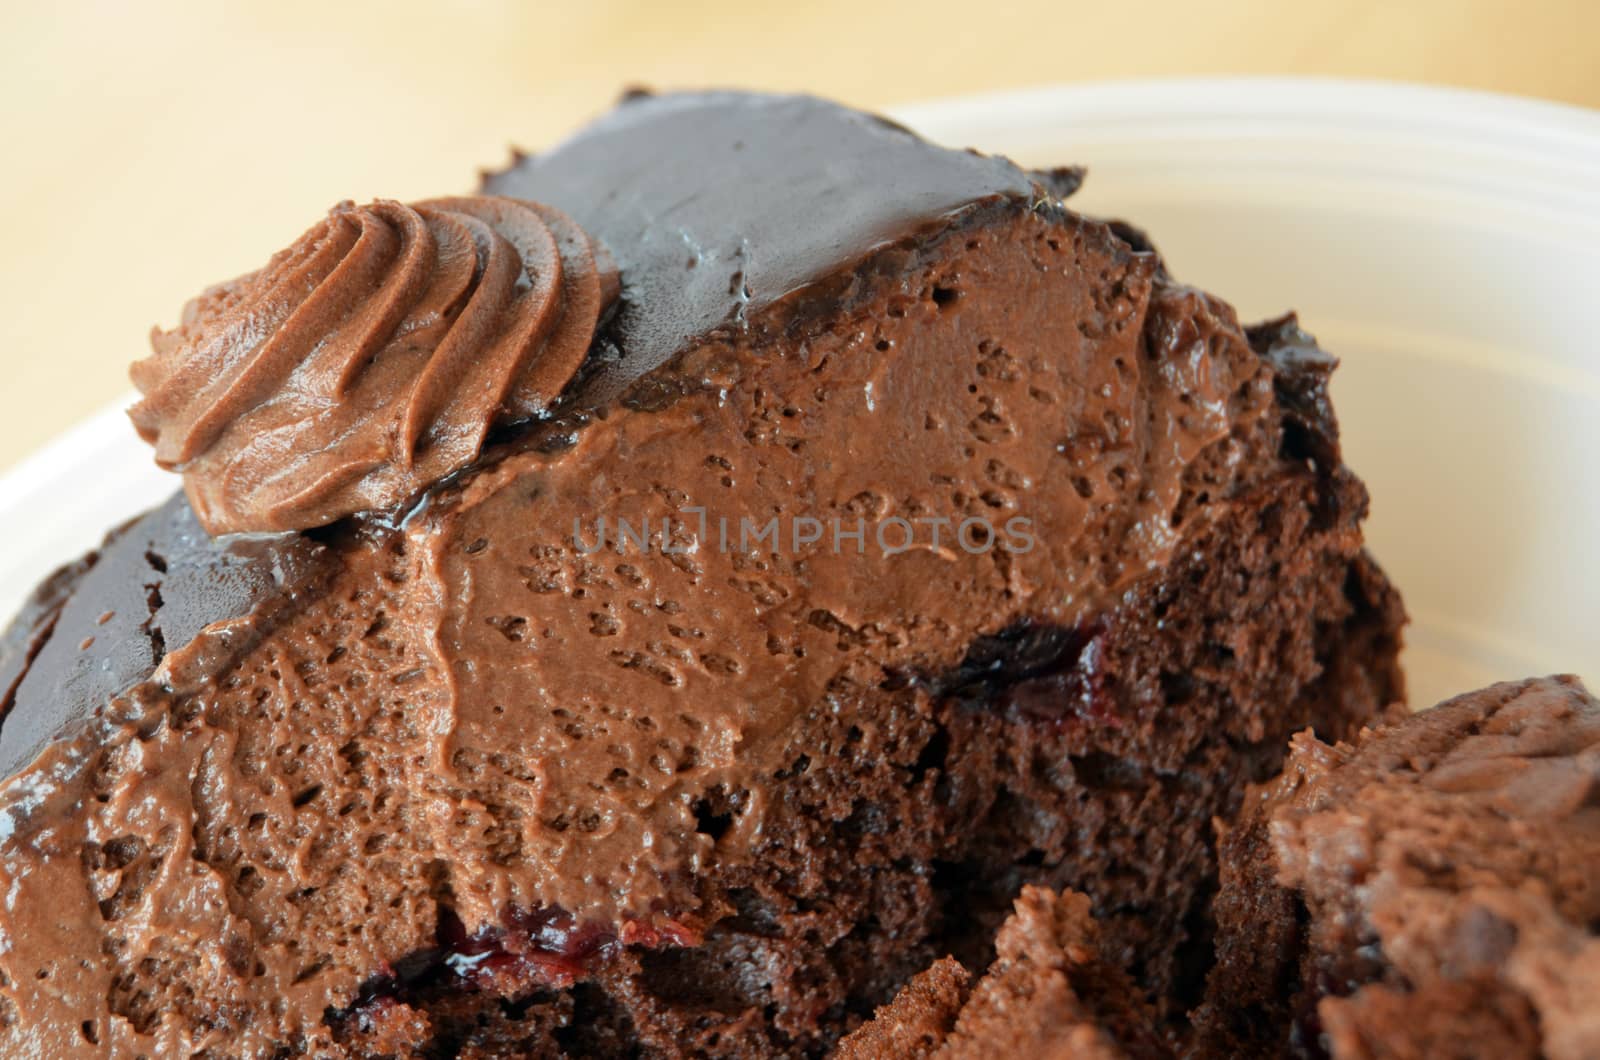 picture of a Dark chocolate cake,sweet food